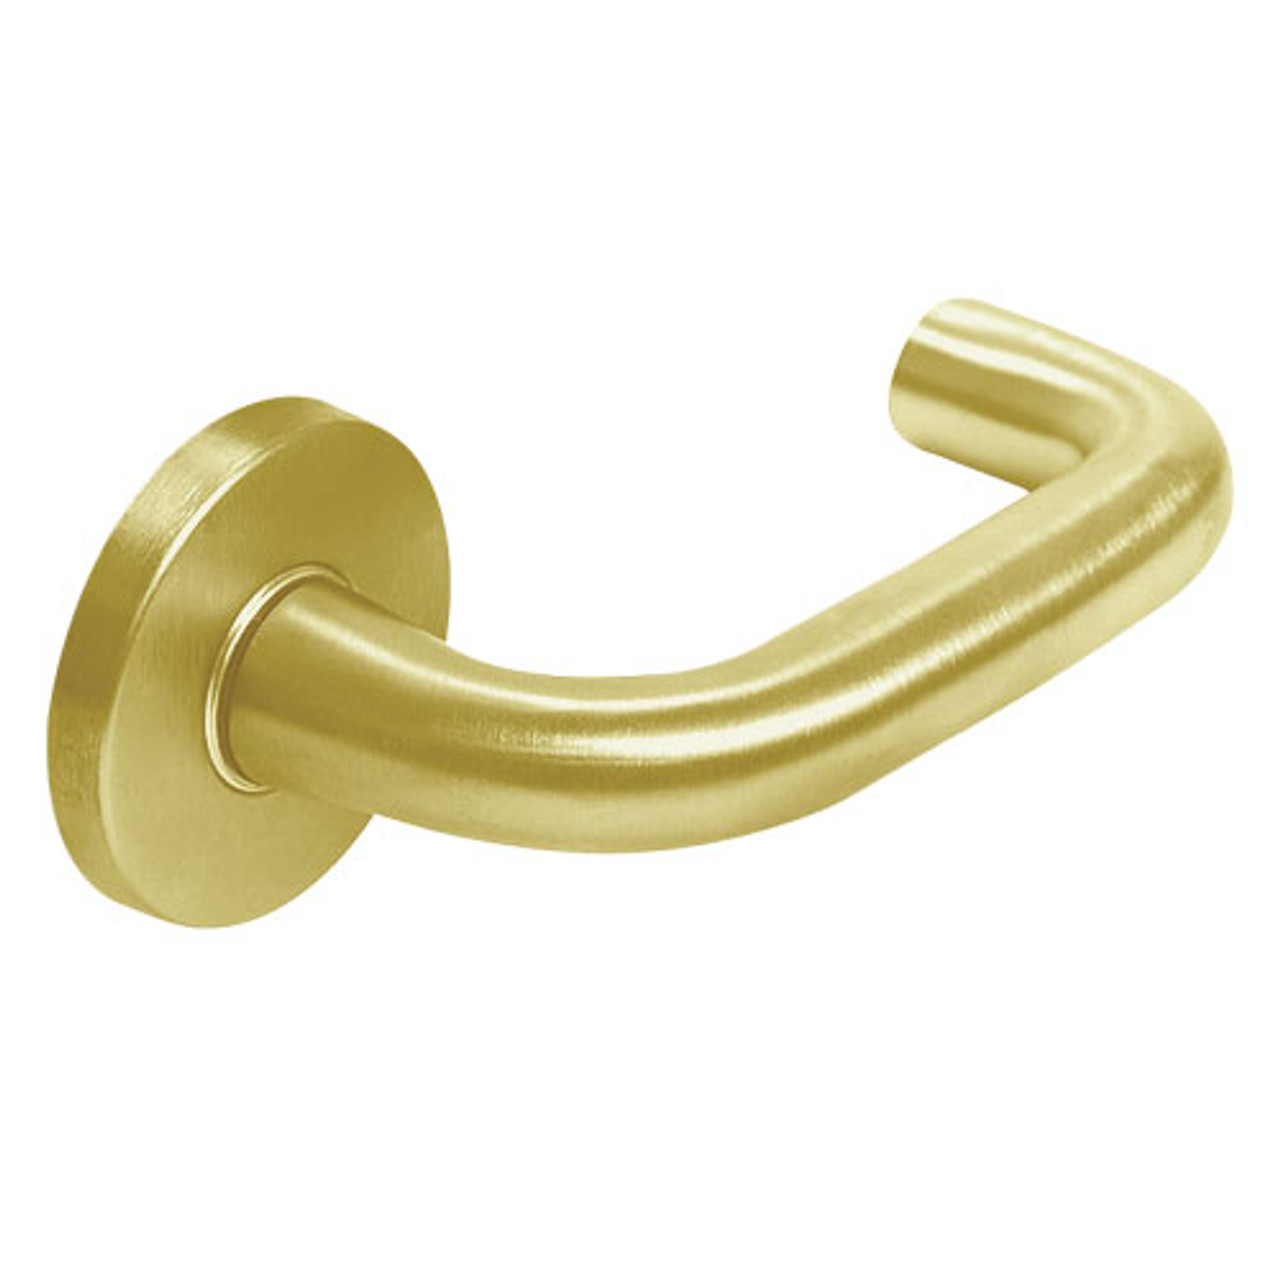 ML2048-LWF-606-LC Corbin Russwin ML2000 Series Mortise Entrance Locksets with Lustra Lever in Satin Brass